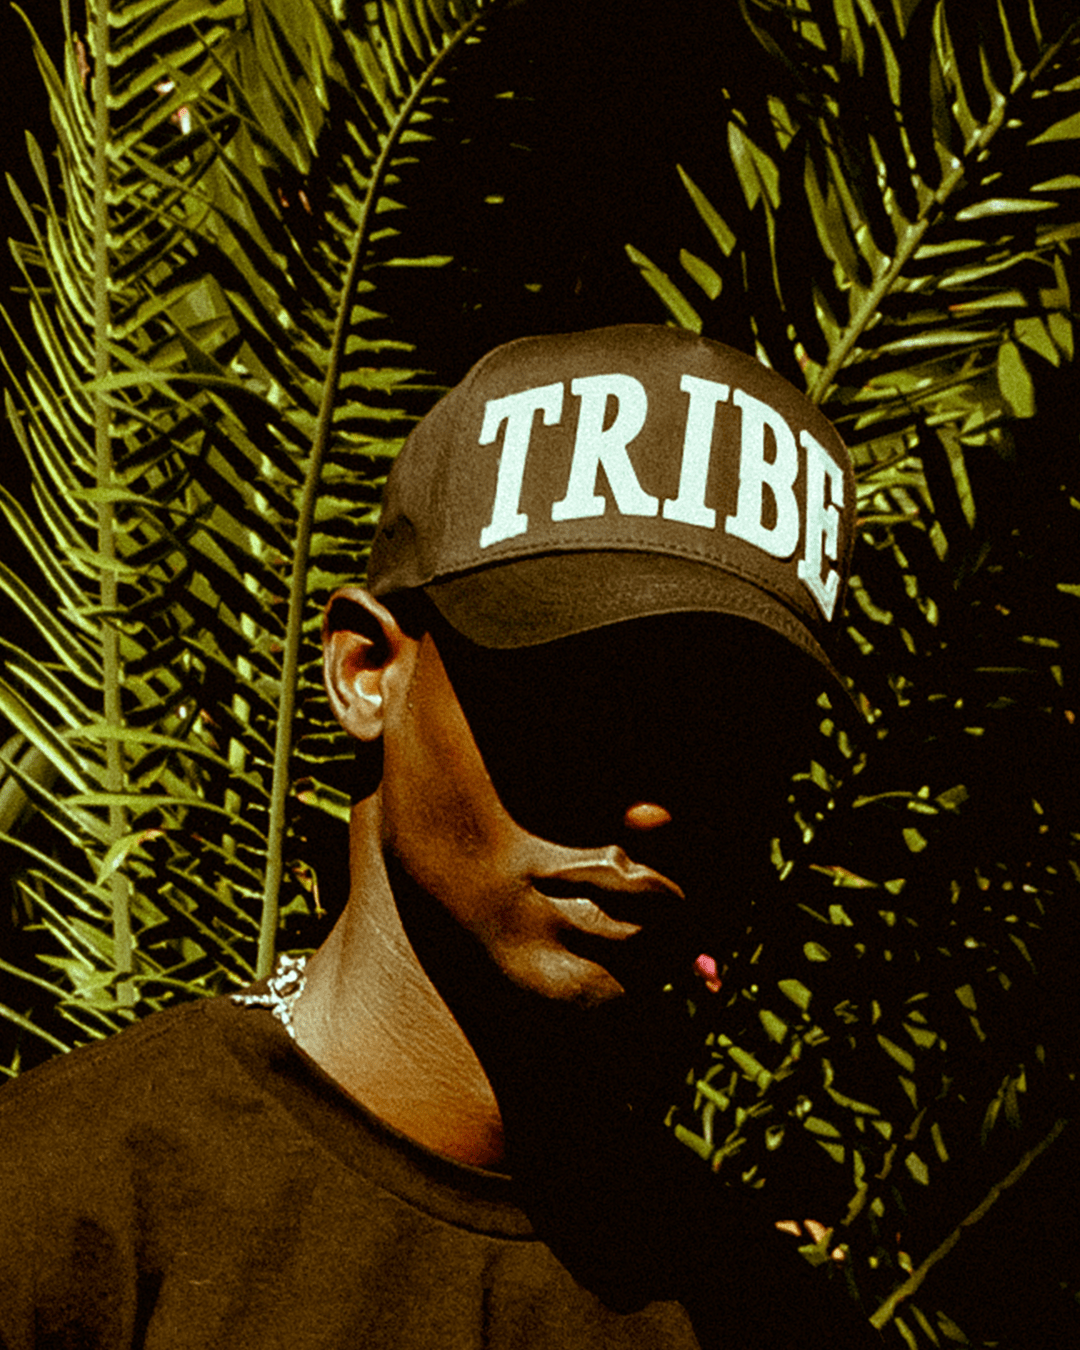 Triibe HAT OS "TRIBE" Hat